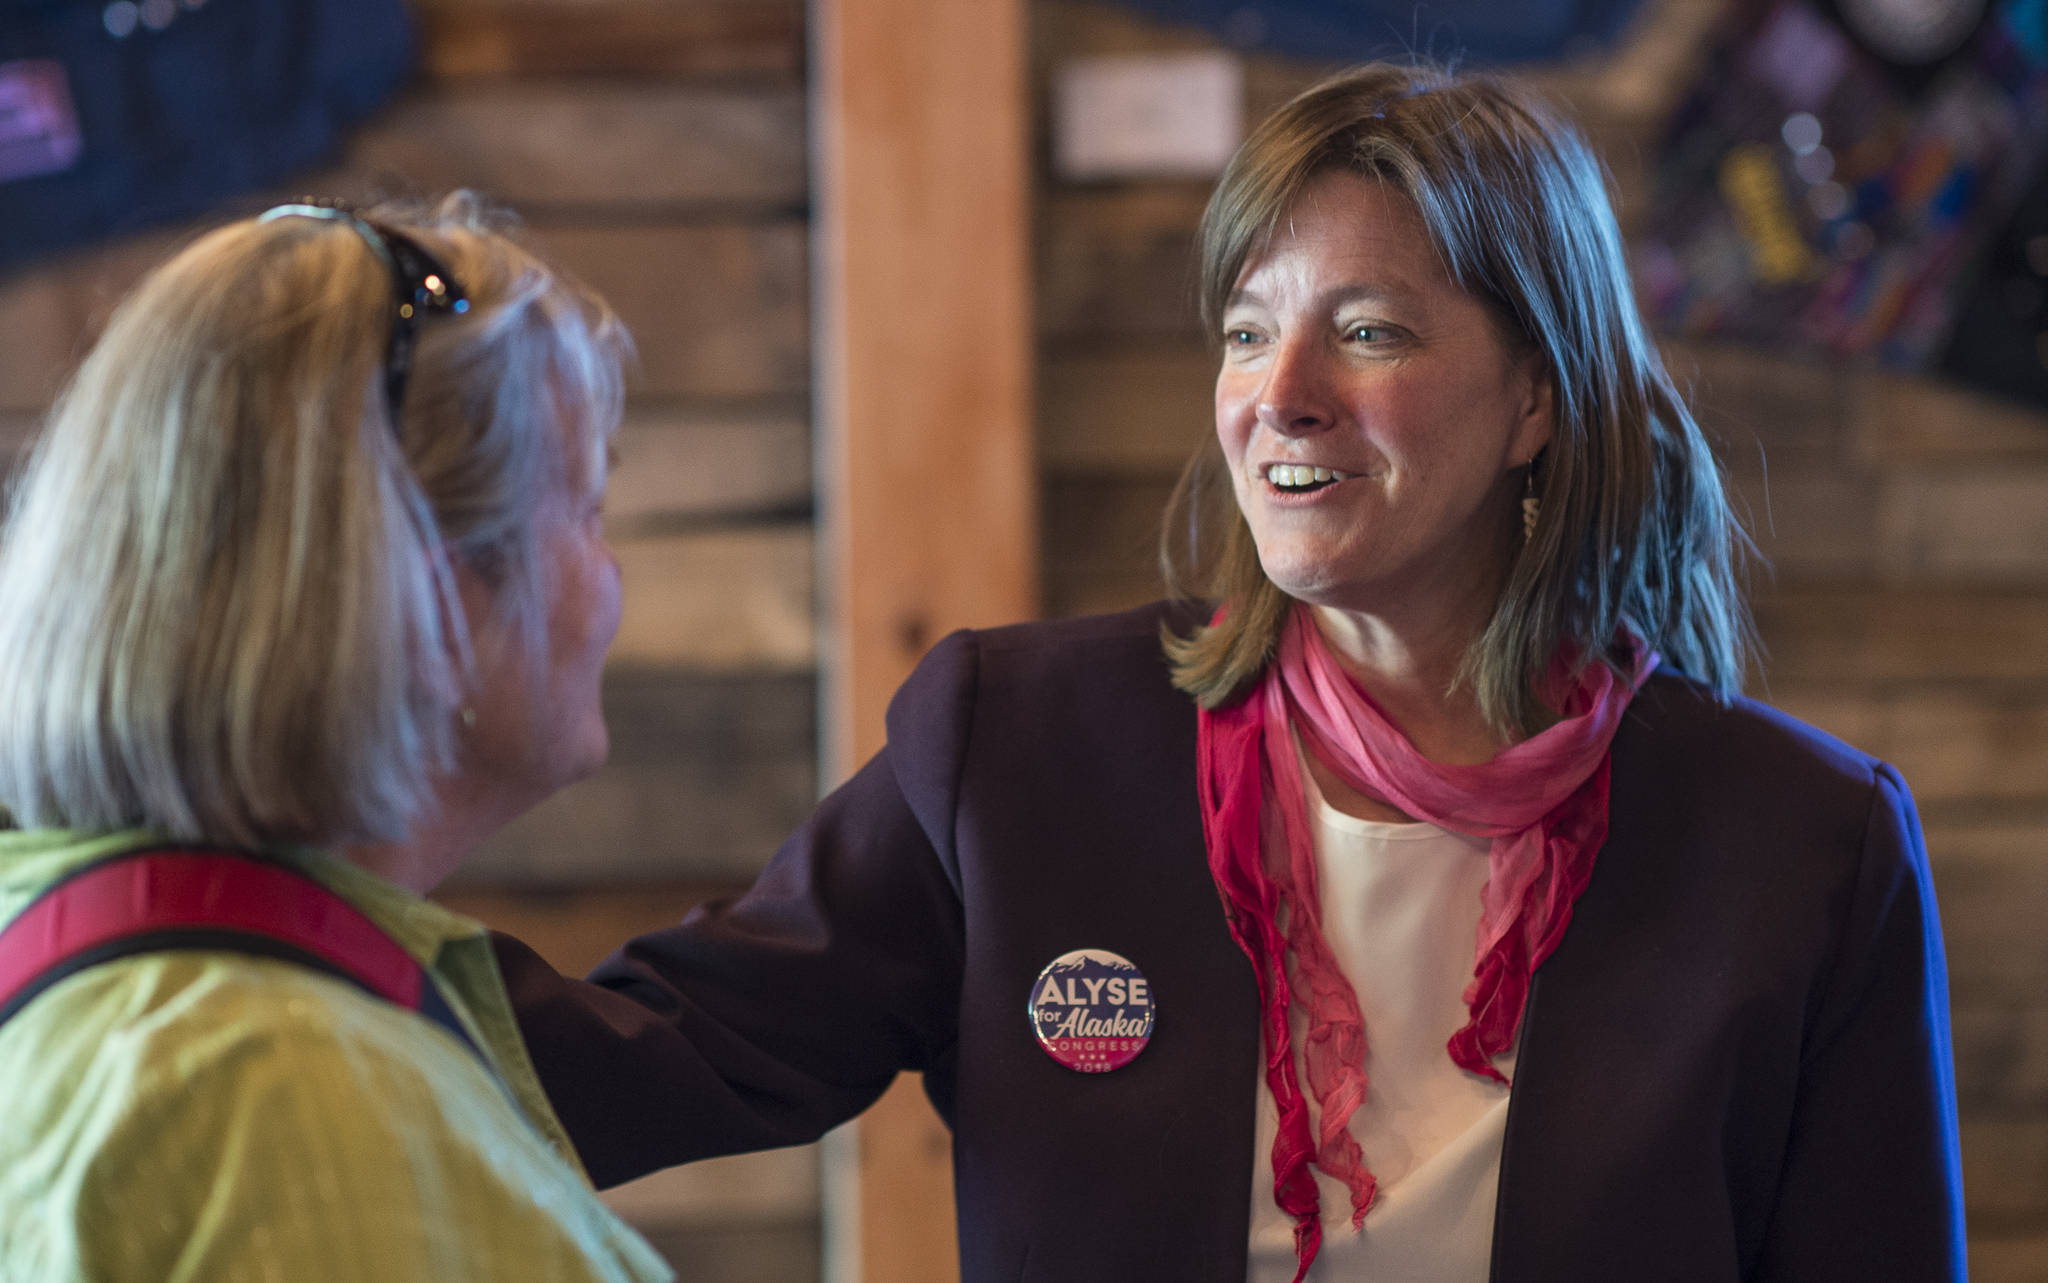 Alyse Galvin, independent candidate for U.S. House of Representatives, right, speaks with Marilyn Orr during a “town-hall-style coffee and conversation” at 60 Degrees North Coffee and Tea on Friday, Sept. 14, 2018. Galvin is running against Republican incumbent Rep. Don Young. (Michael Penn | Juneau Empire)